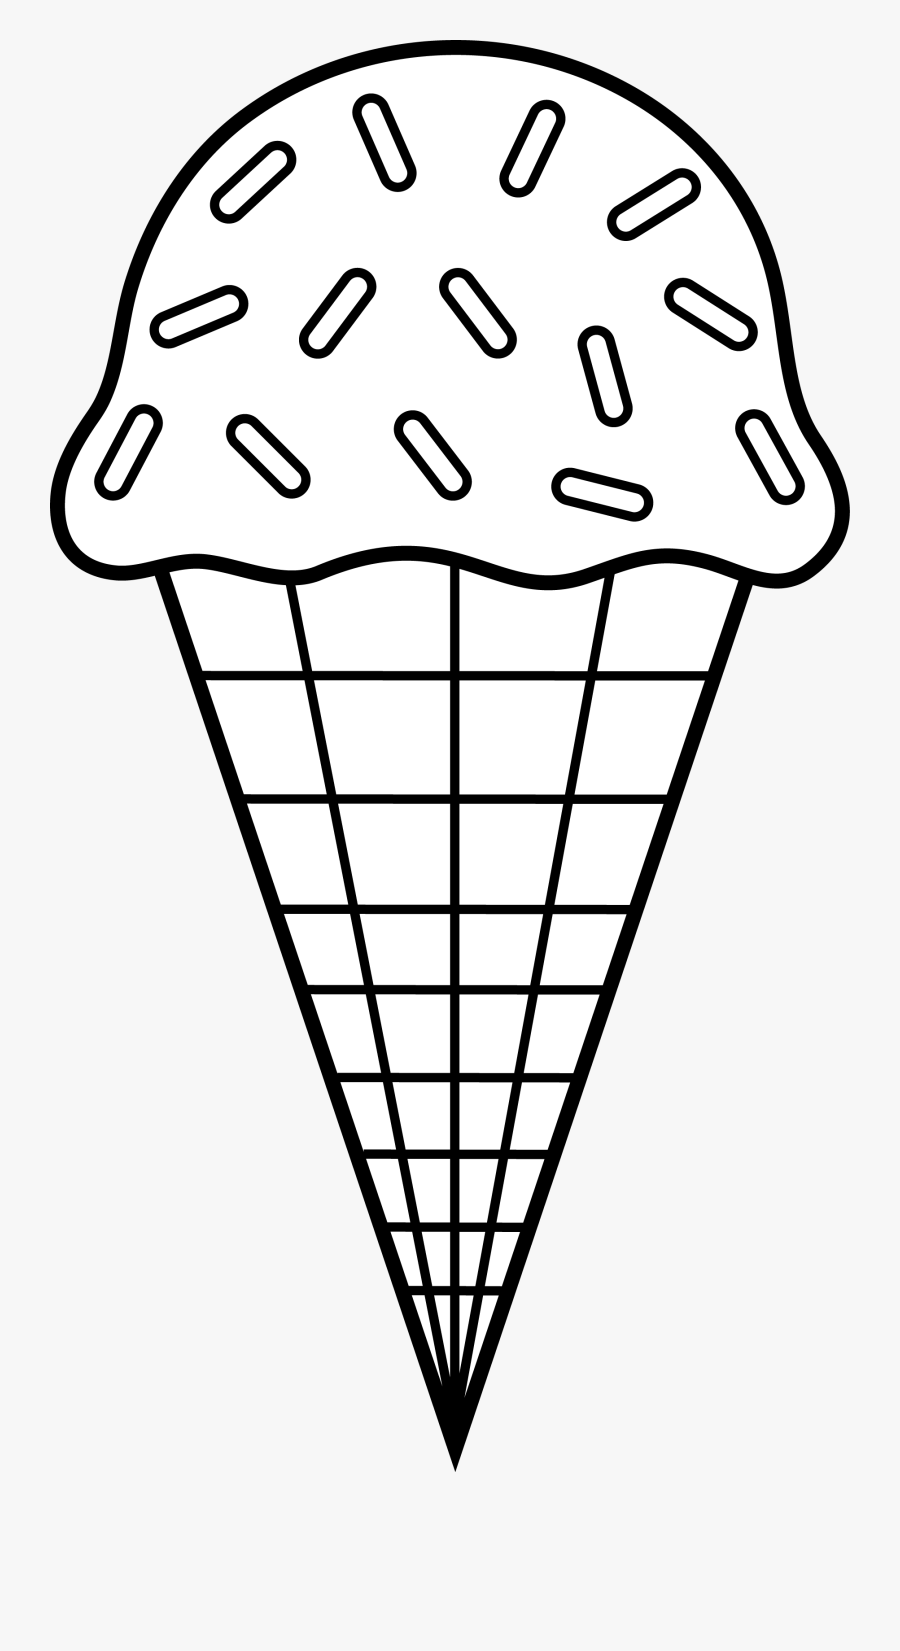 Ice Cream Black And White Clipart Black And White Ice Ice Cream Clipart Black And White Free Transparent Clipart Clipartkey